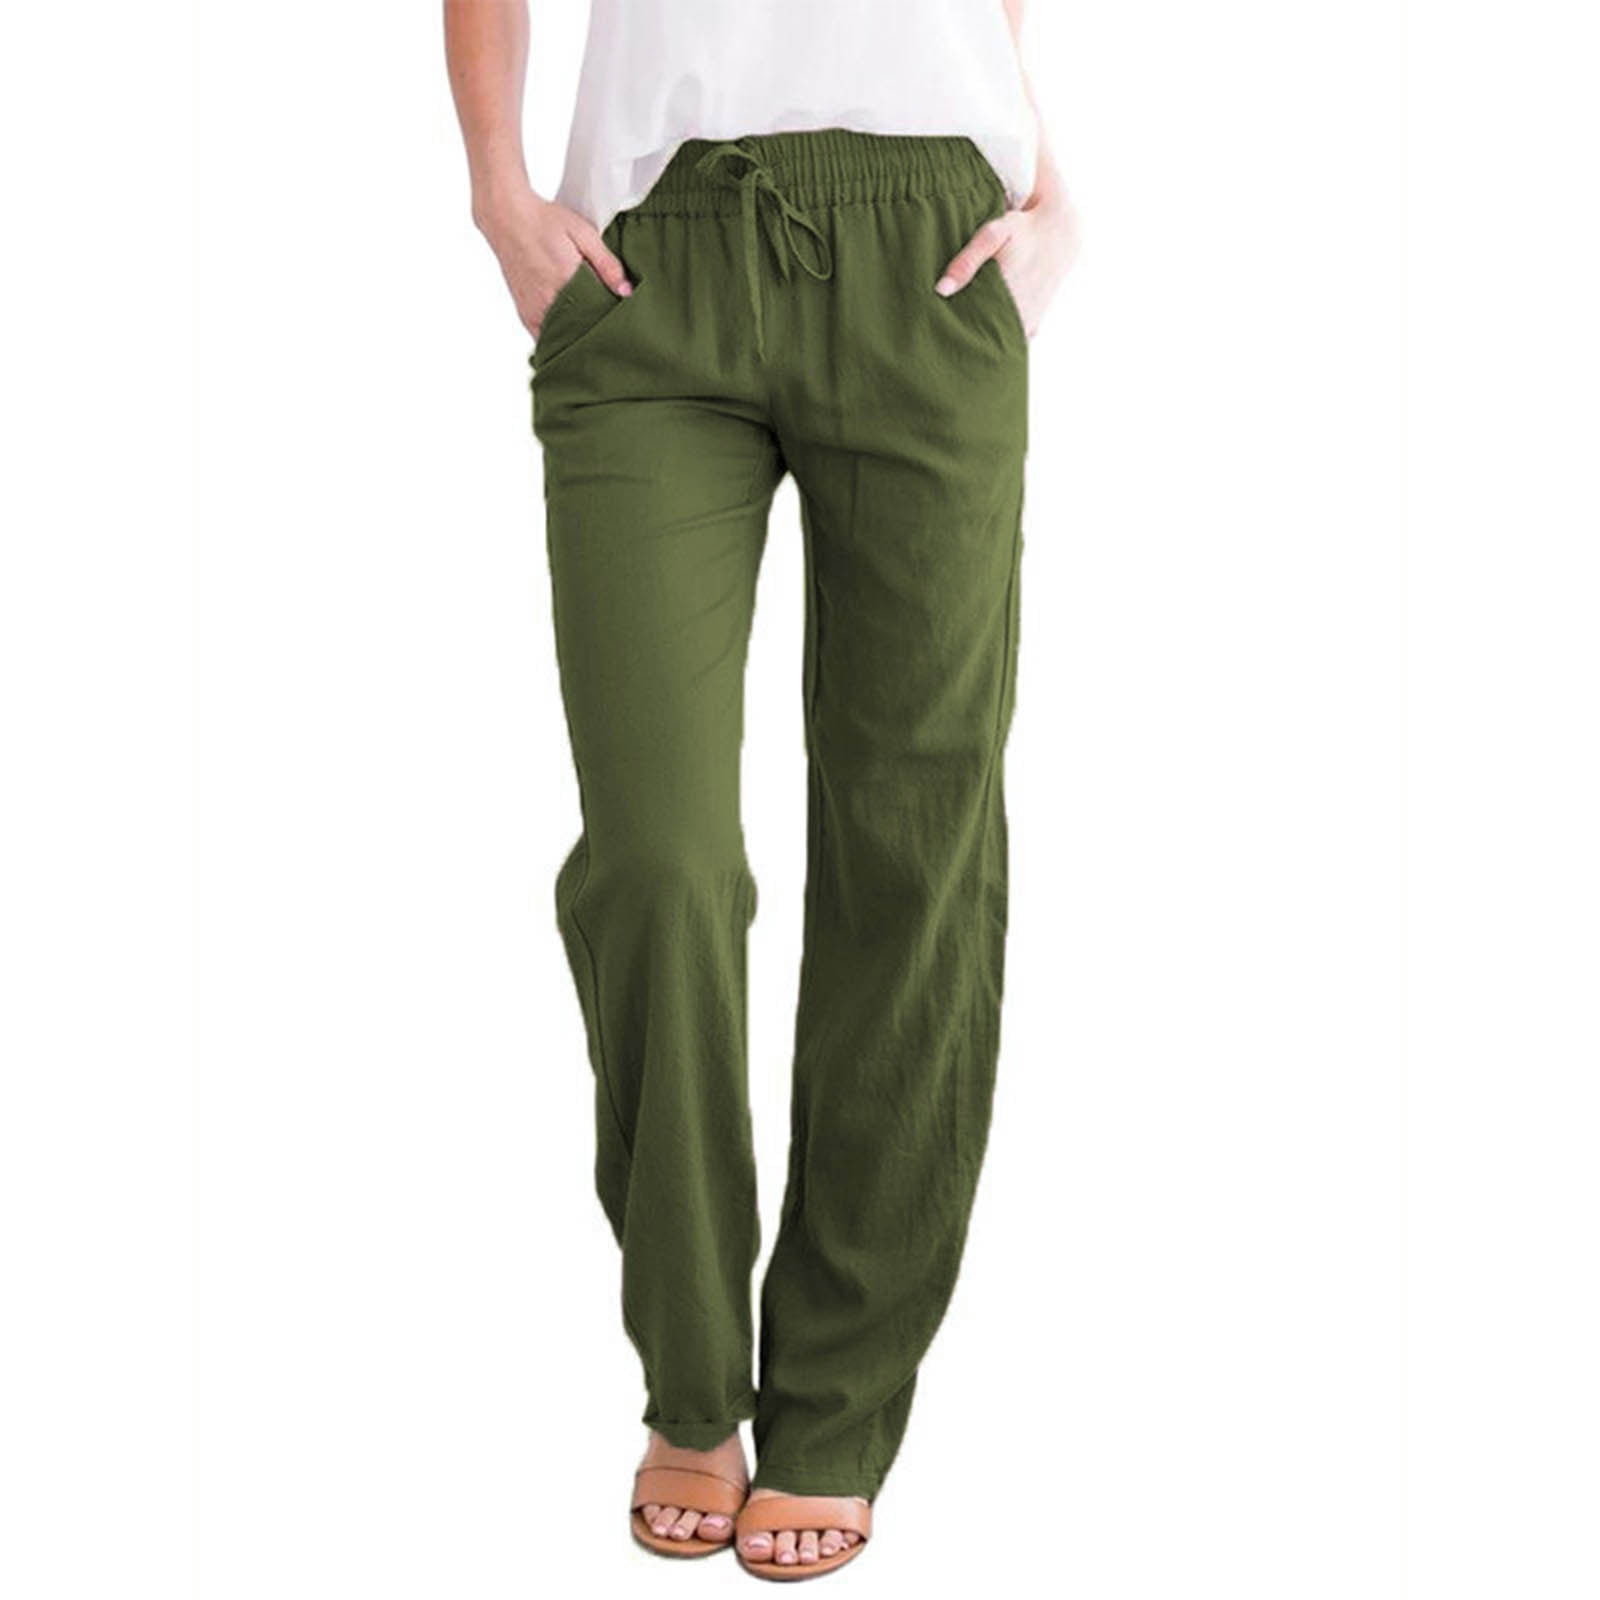 Mrat Comfy Trousers with Pockets Full Length Pants Fashion Ladies ...